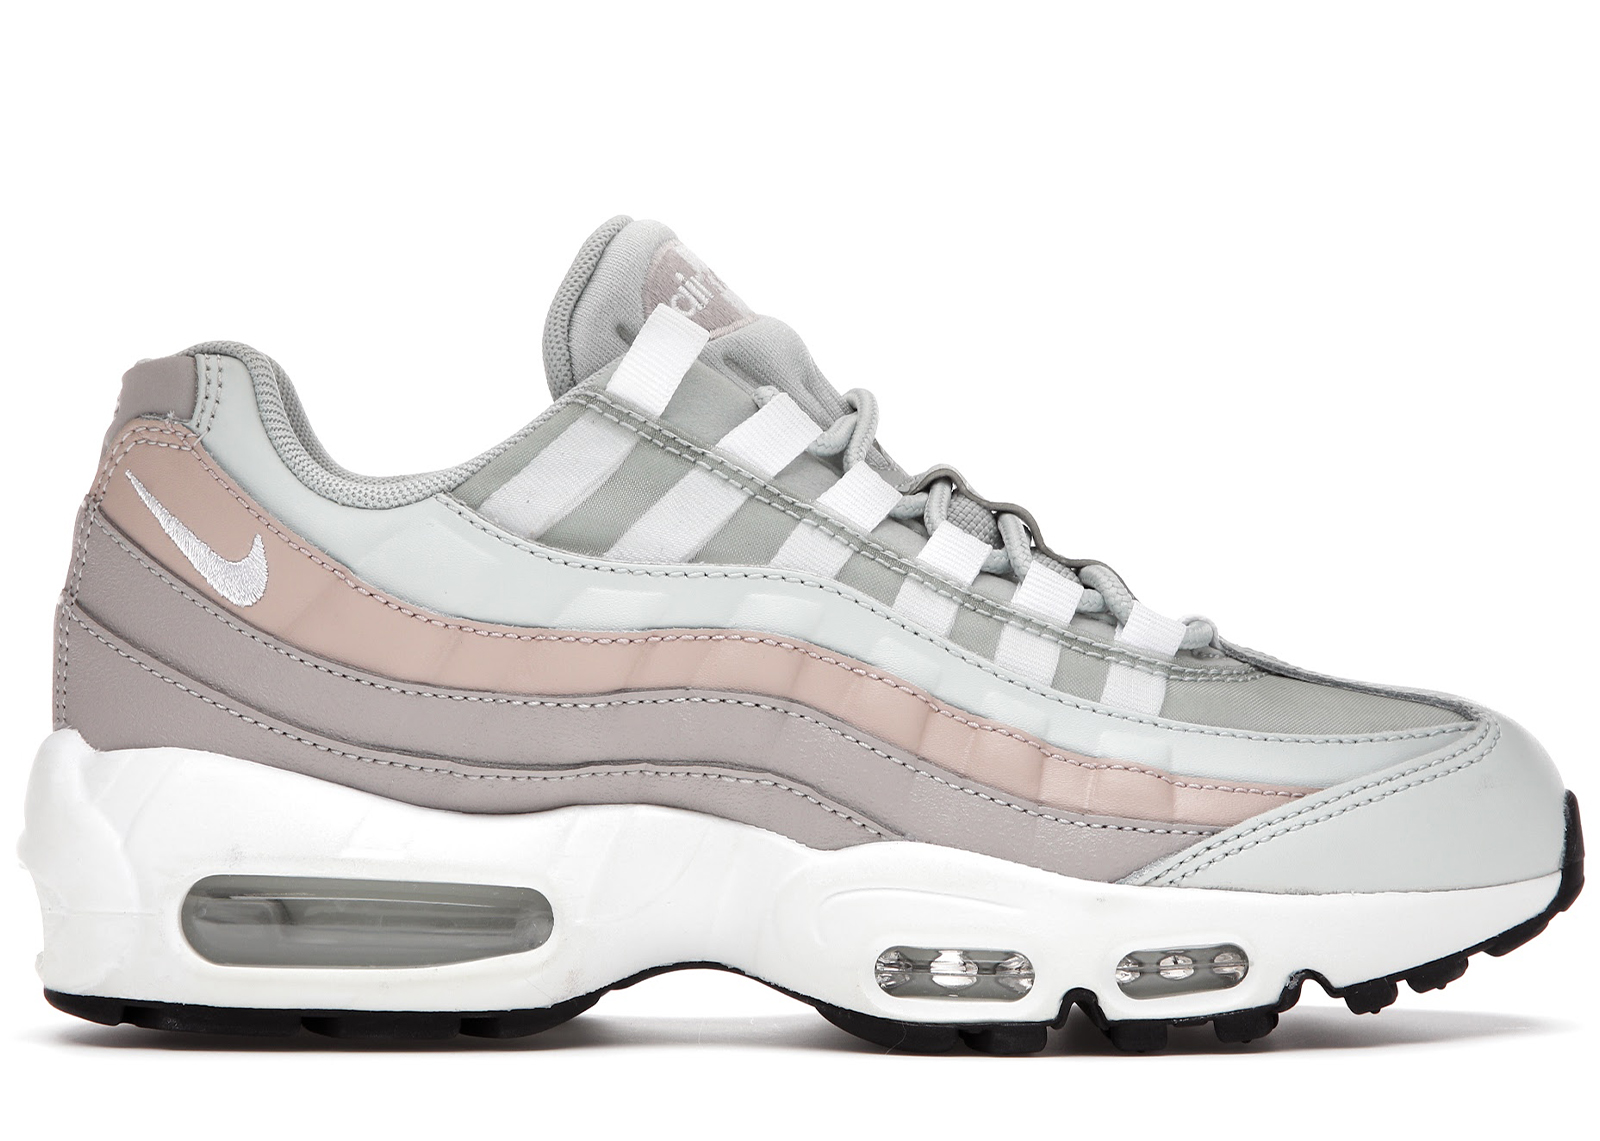 Nike Air Max 95 Moon Particle (Women's) - 307960-018 - US